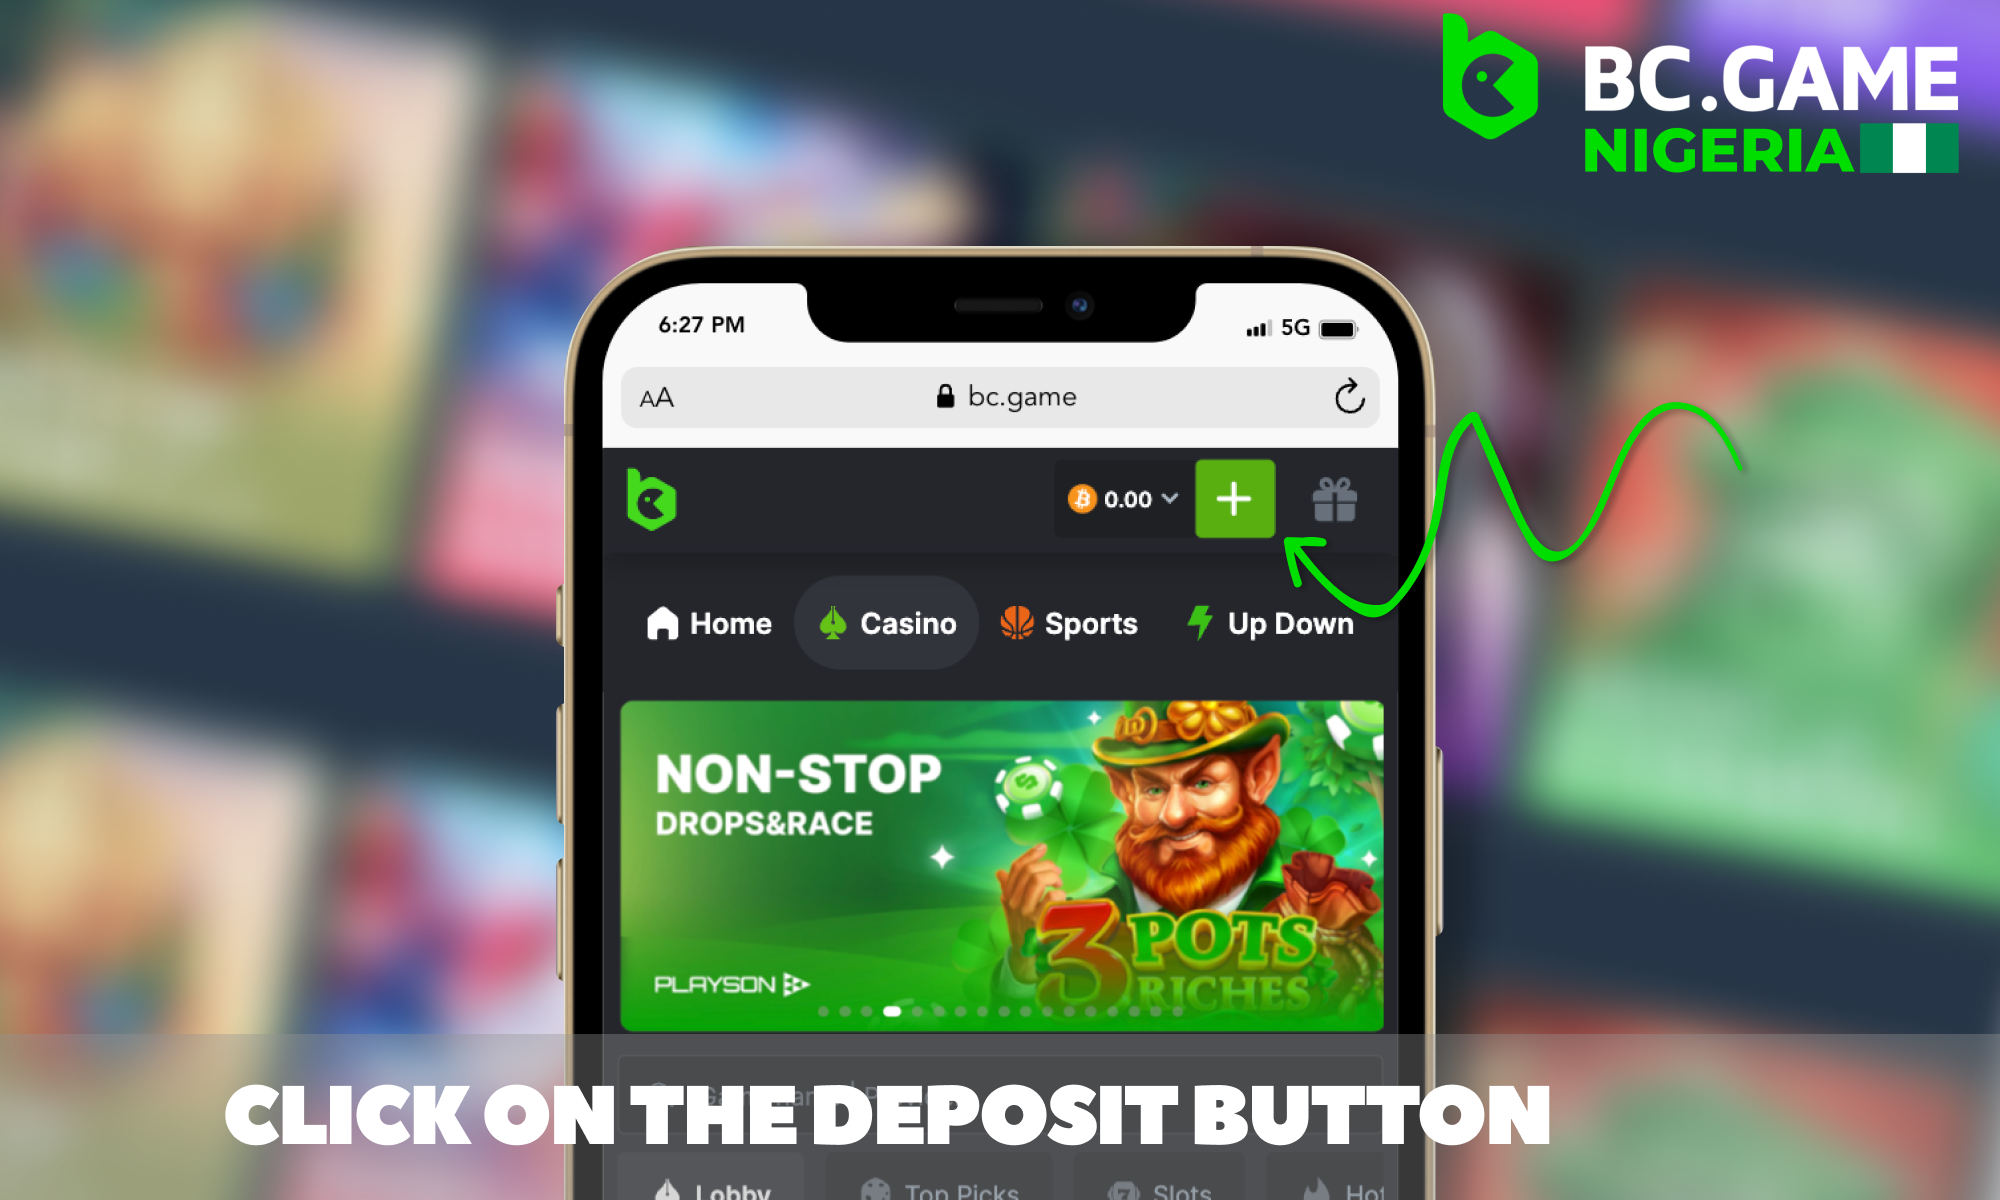 Go to the Deposit section at the BC Game Nigeria site